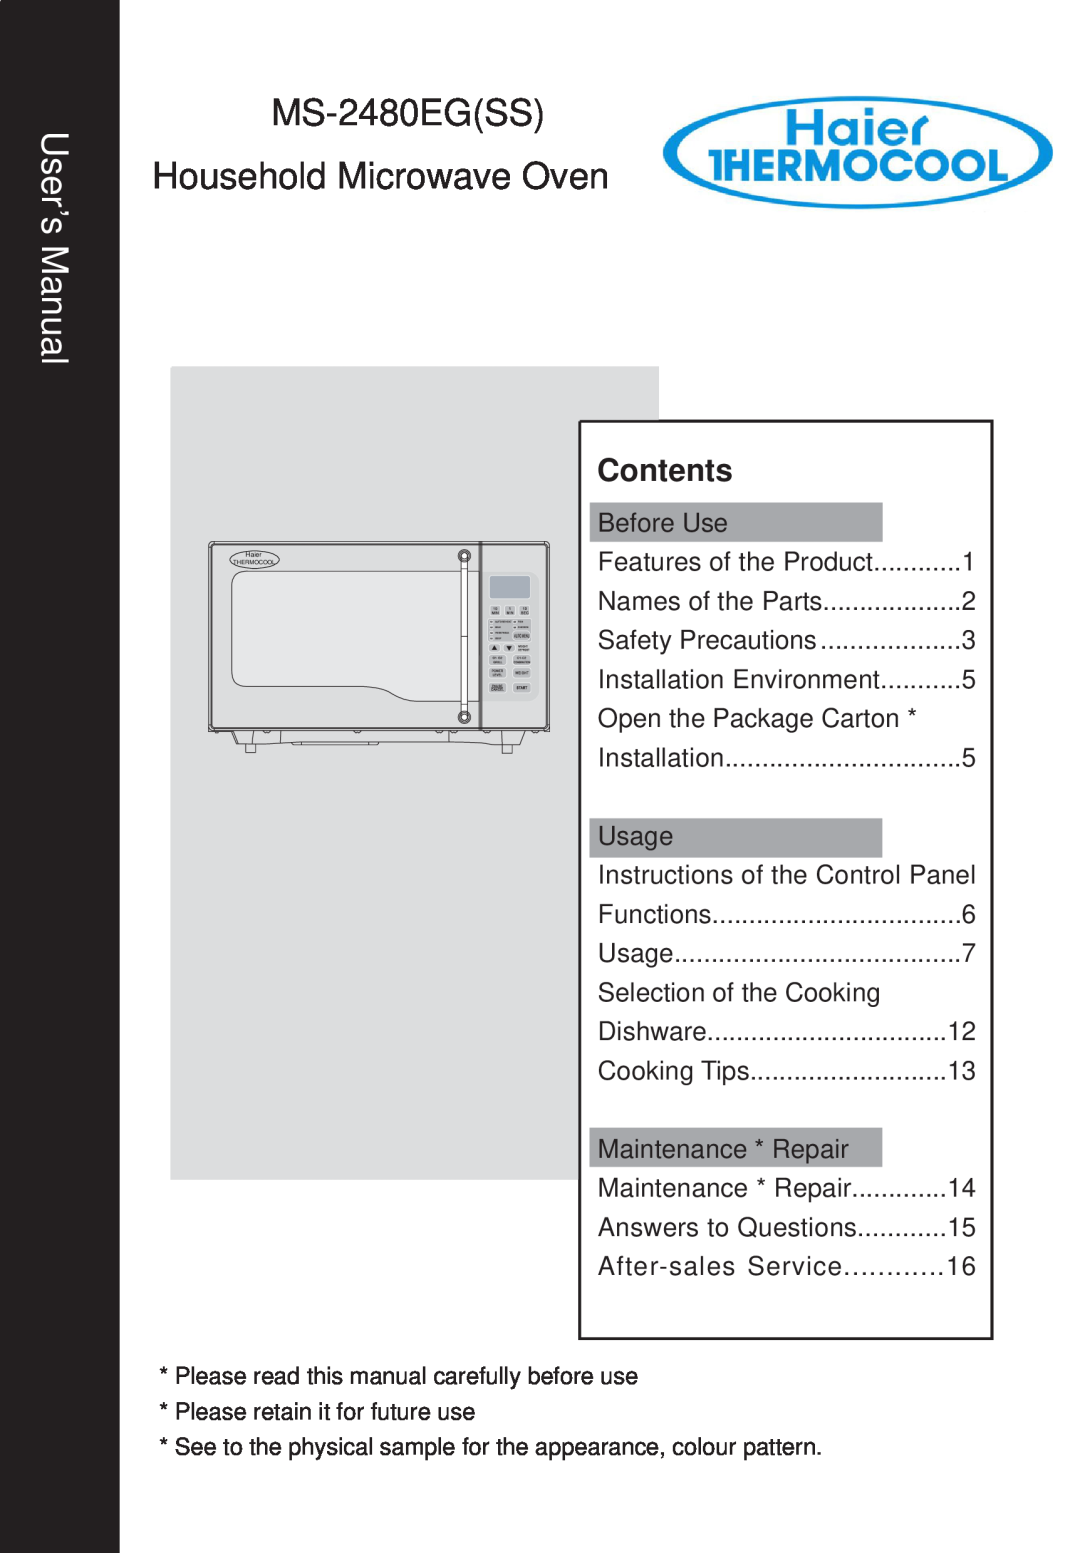 Haier MS-2480EG(SS) user manual Contents, MS-2480EGSS Household Microwave Oven 